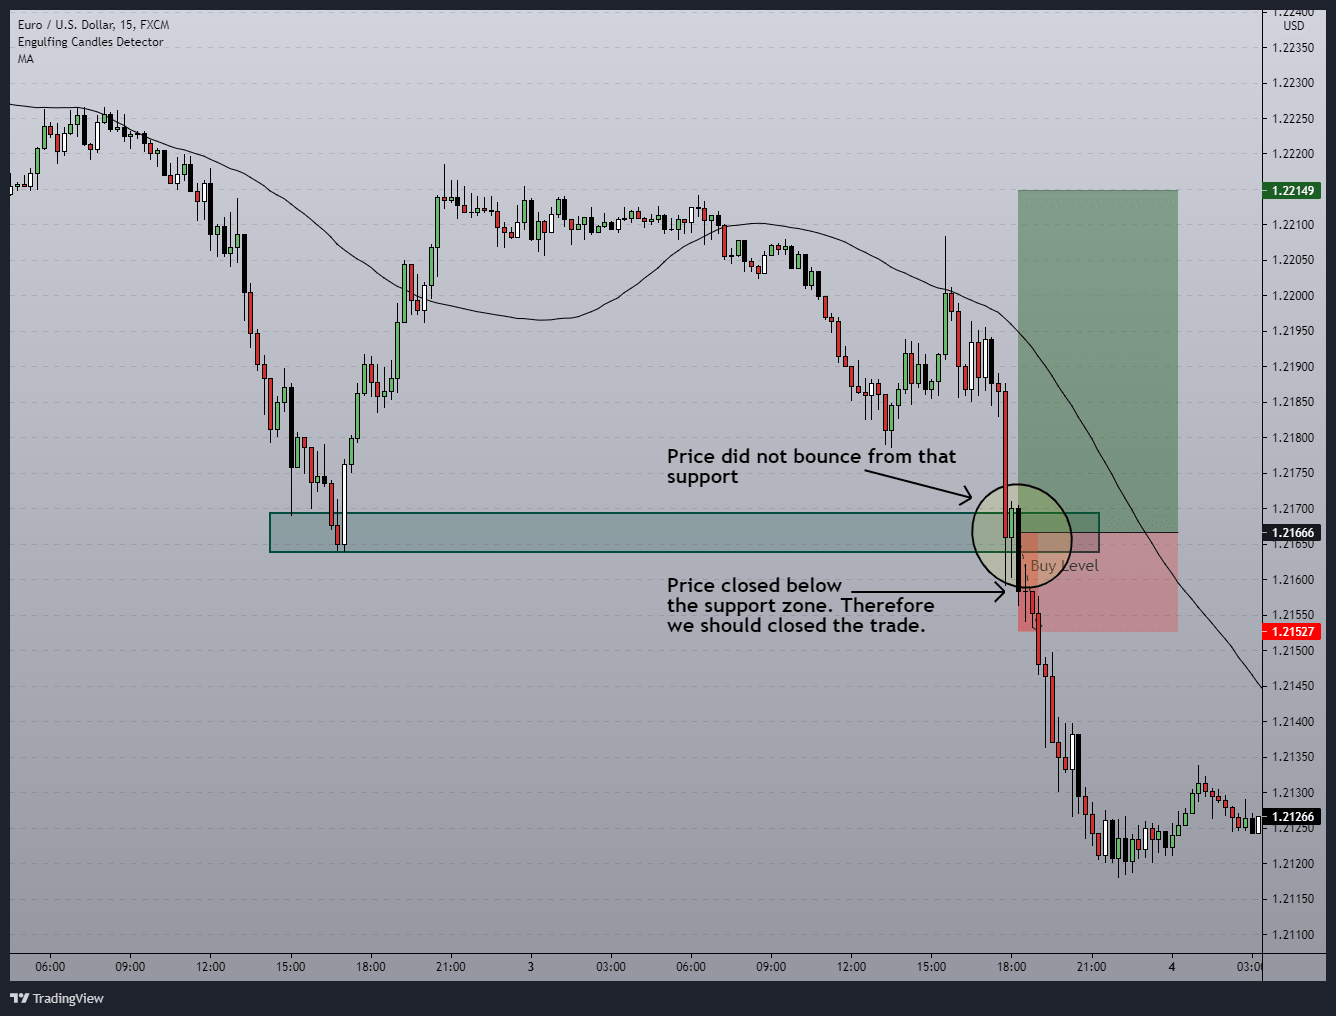 Closed the trade when the price break below the support zone